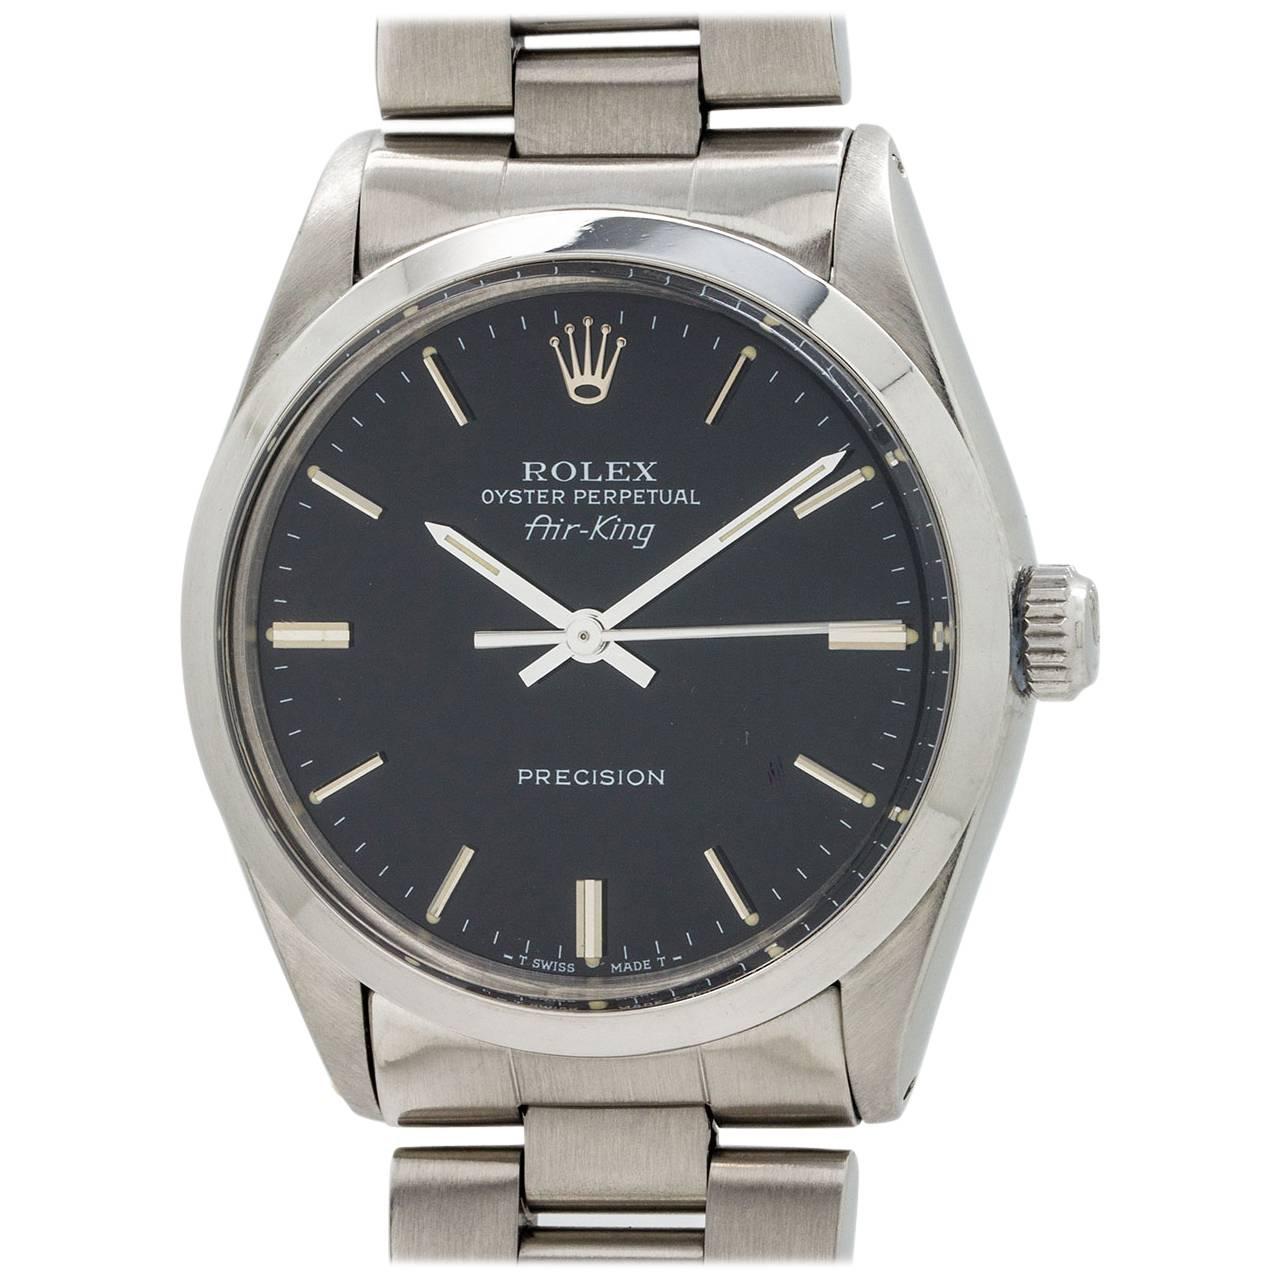 Rolex Stainless Steel Oyster Perpetual Airking Wristwatch ref 5500